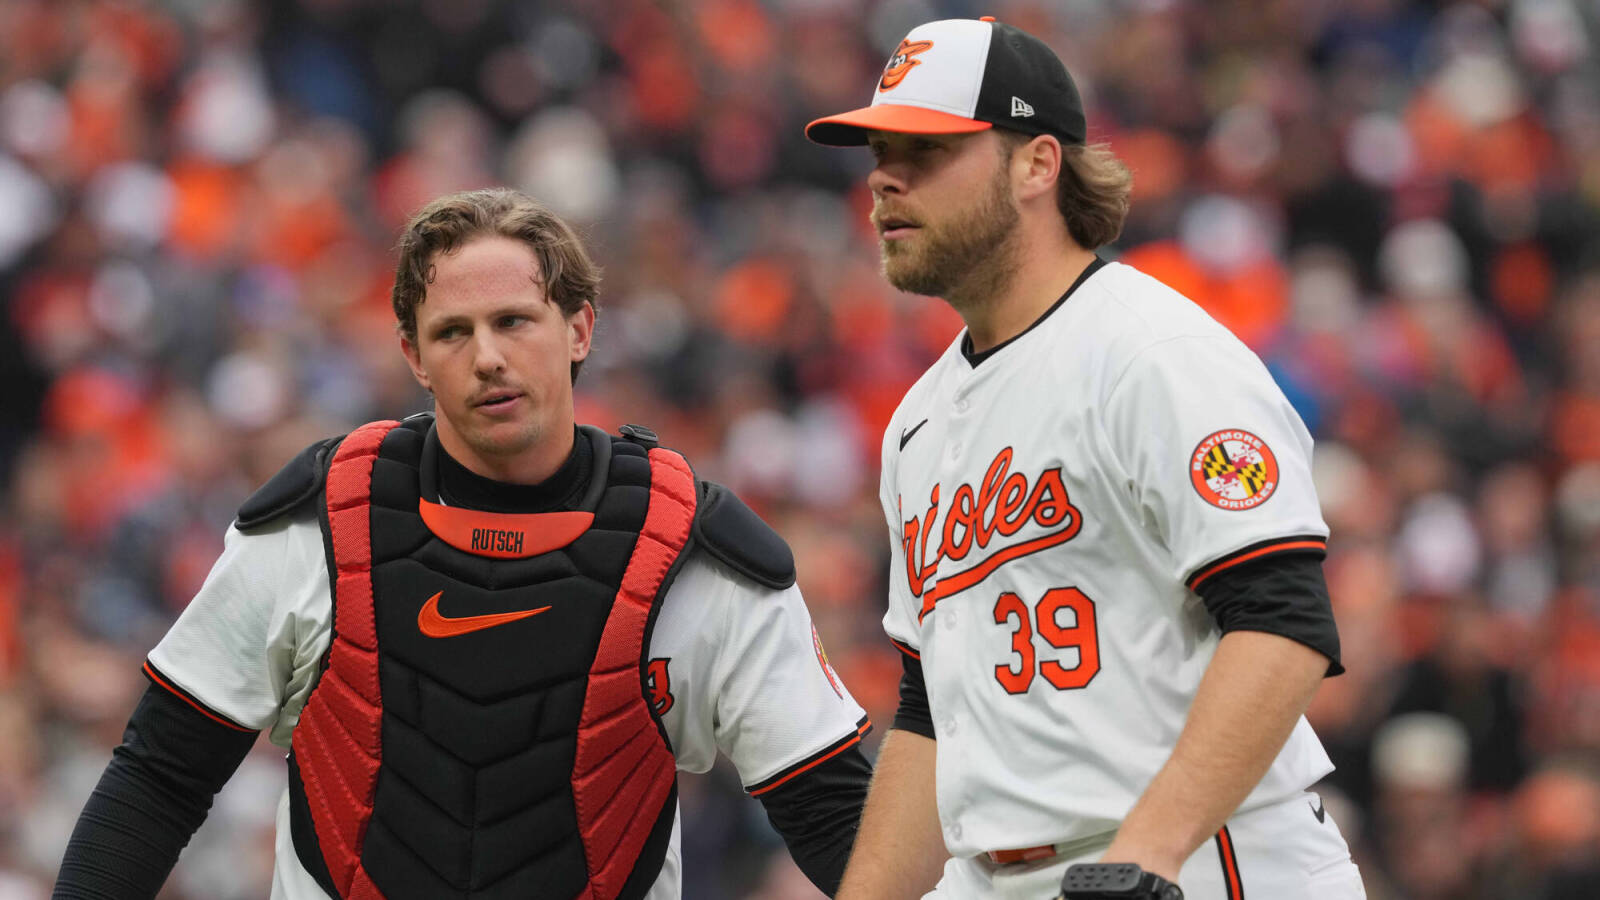 Orioles have the look of a team ready to contend for World Series